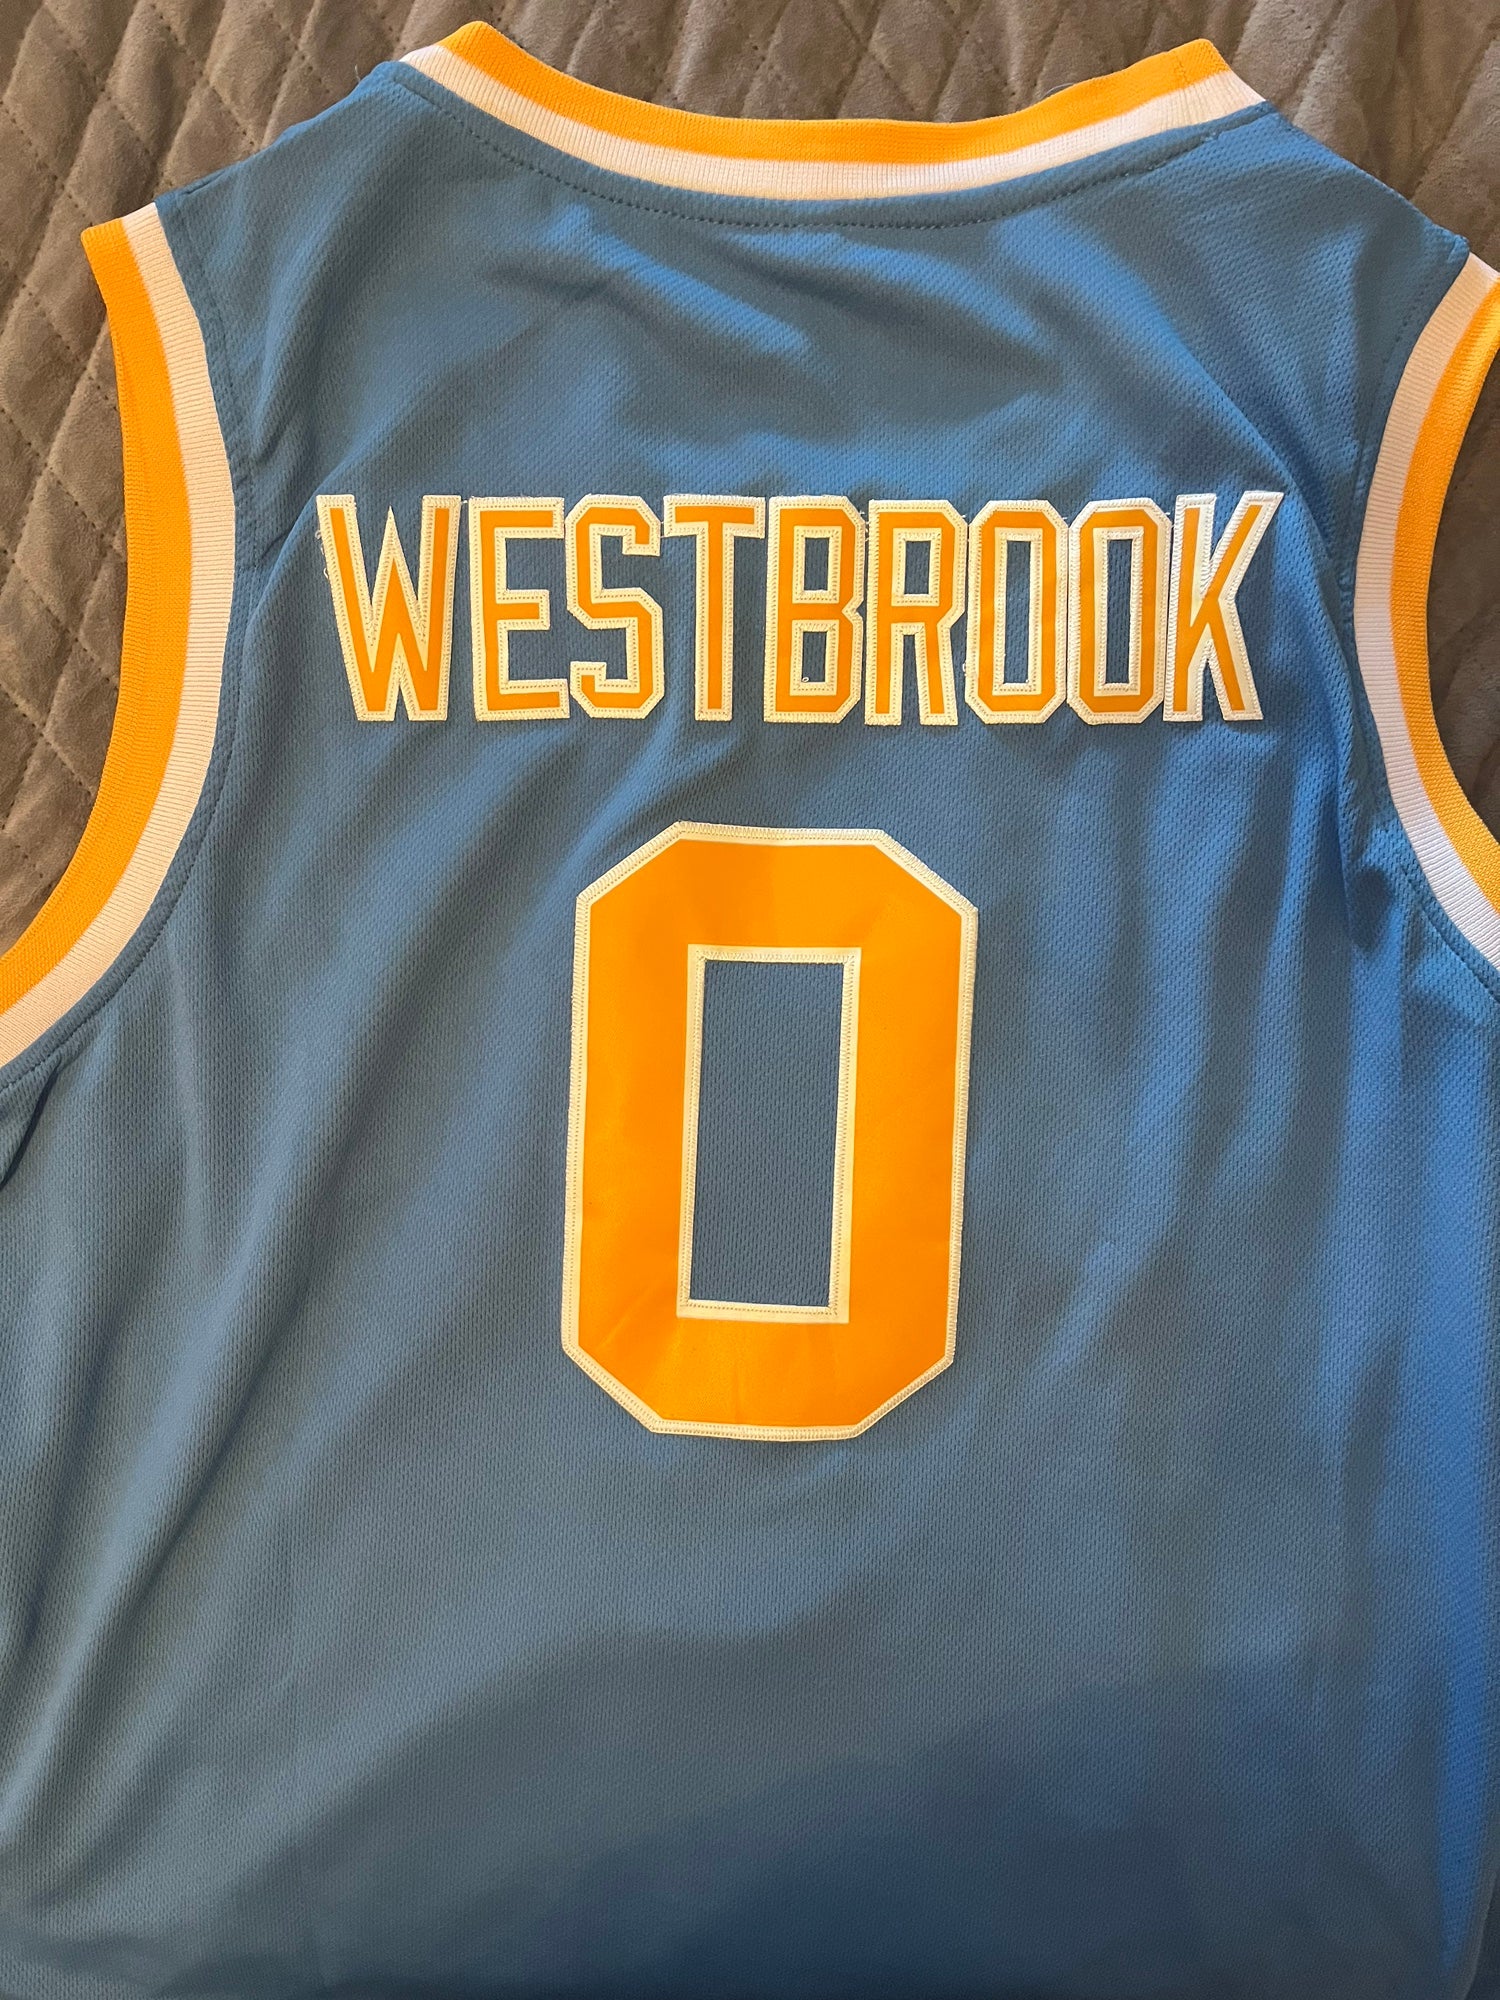 Other, Russell Westbrook Ucla Jersey